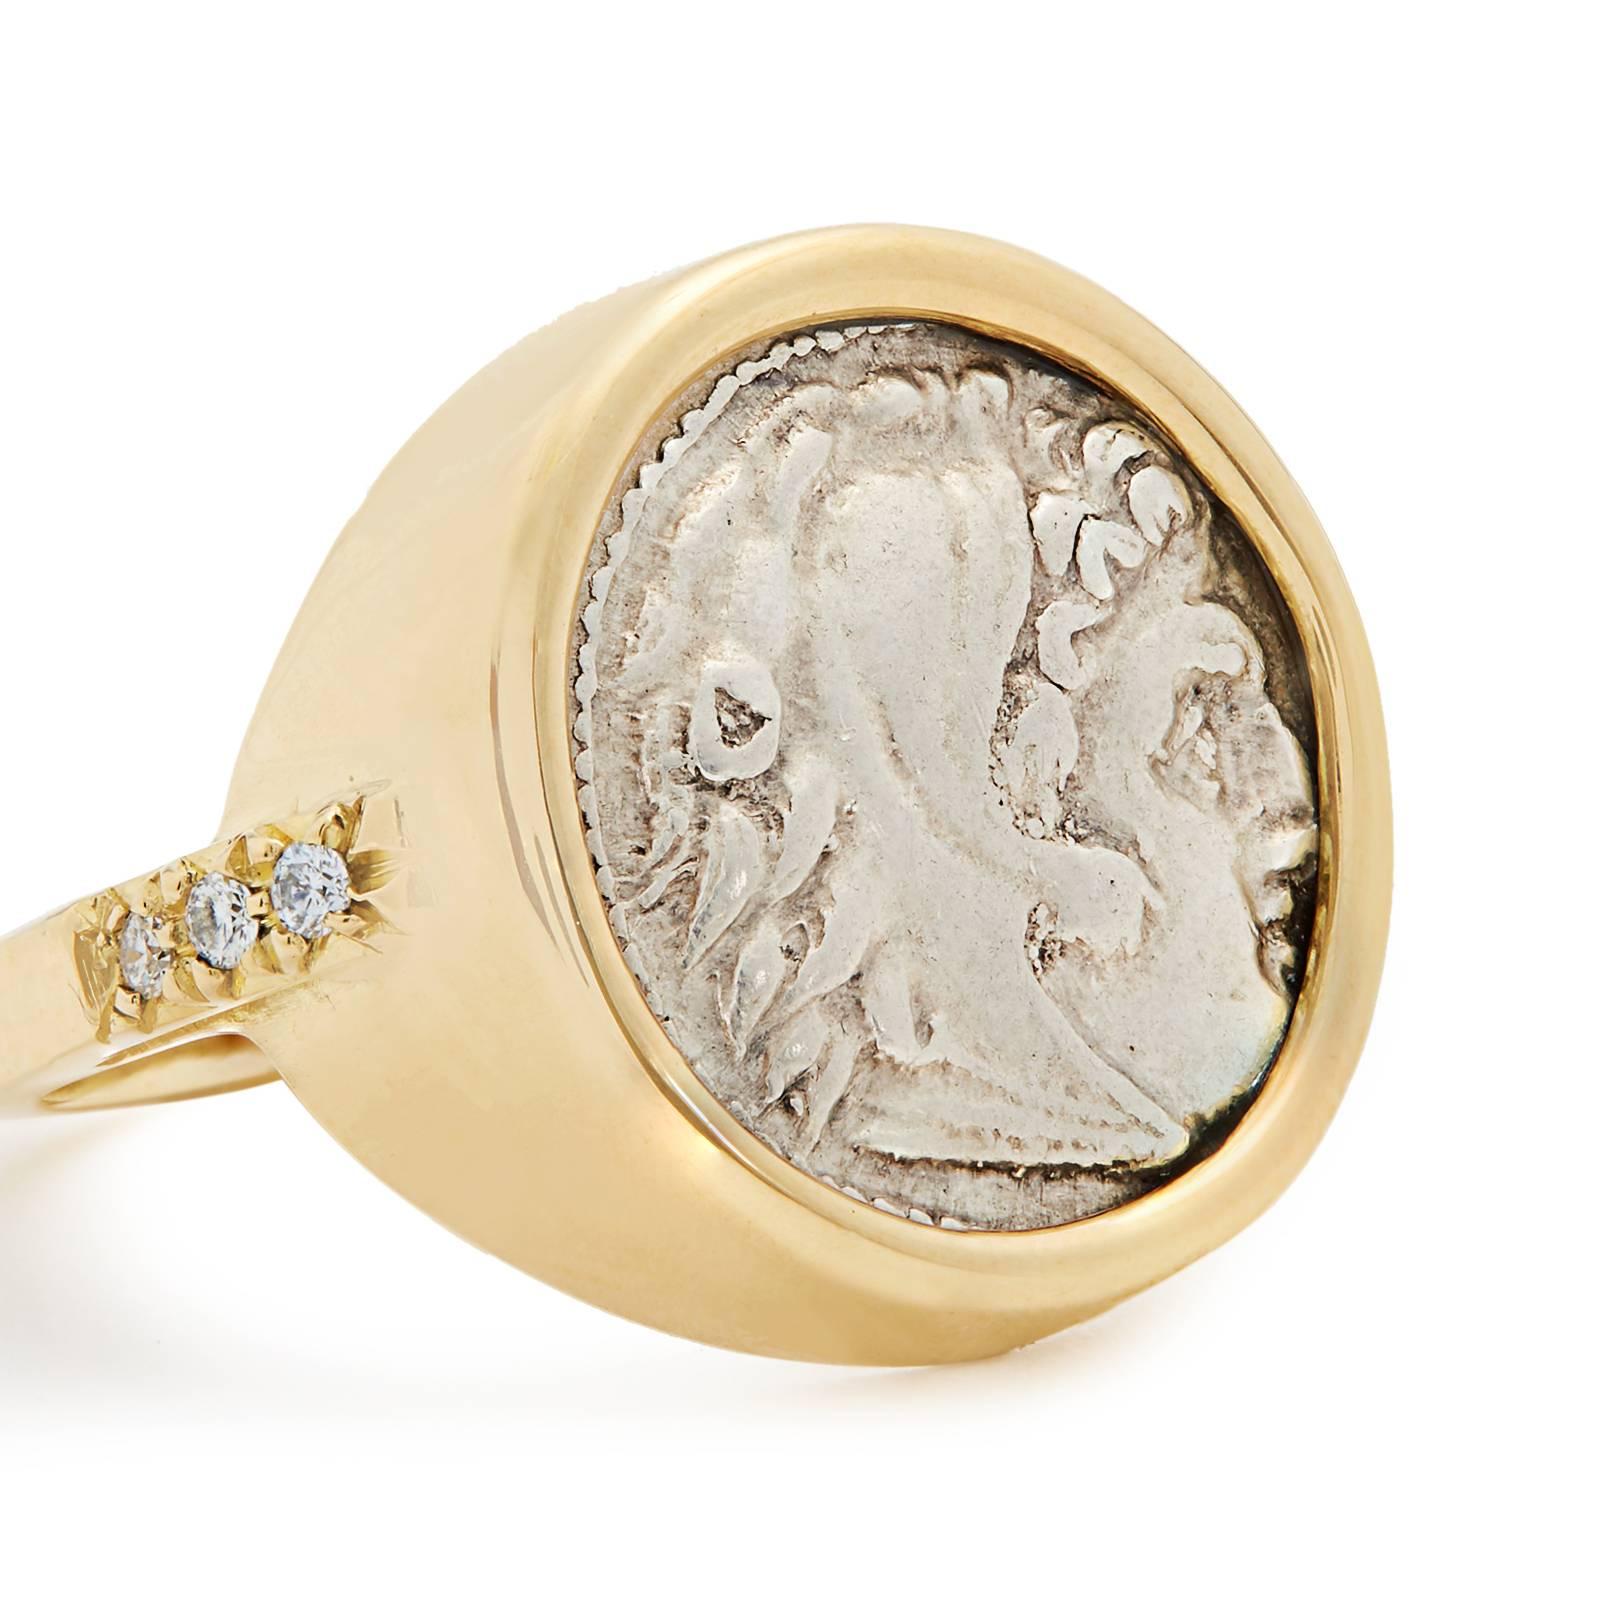 This DUBINI coin ring from the 'Empires' collection features an authentic Macedon silver coin minted circa 336-323 B.C. set in 18K yellow gold with diamonds.

DEPICTED ON COIN
Obverse: Head of Heracles right wearing lion's scalp; 
Reverse: Zeus